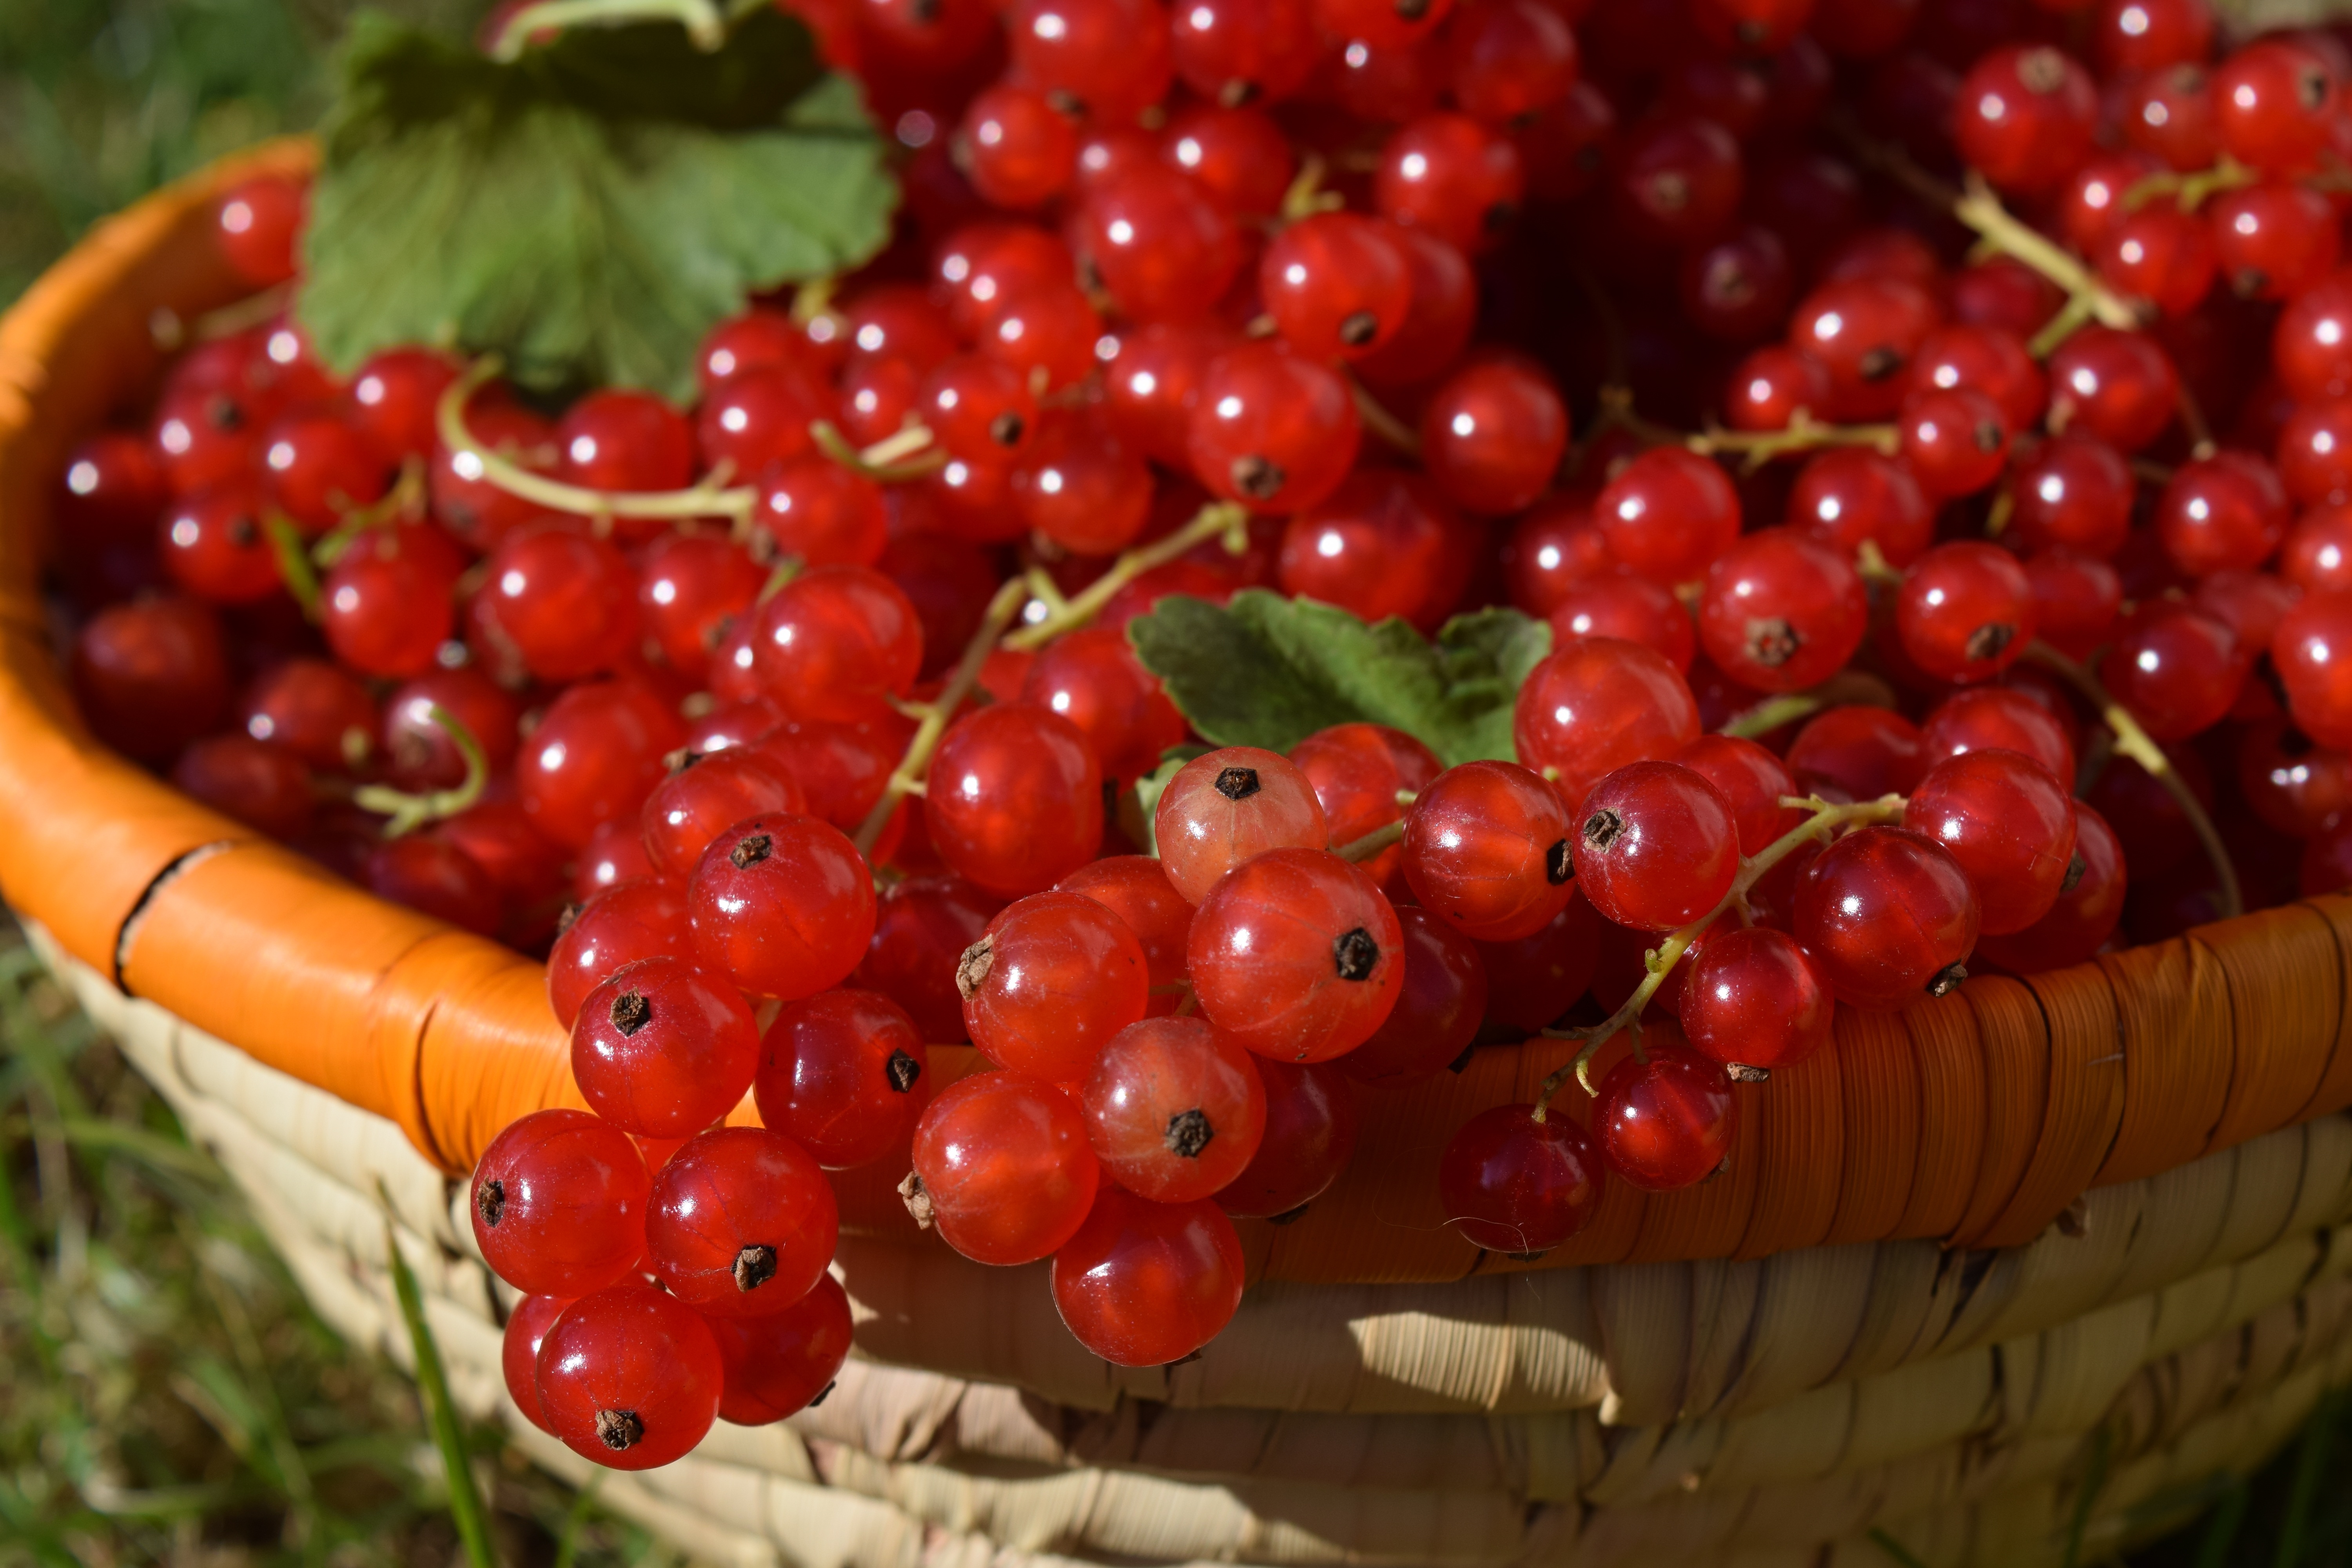 food, berries, currant, basket, ripe, red currants, redcurrant Smartphone Background